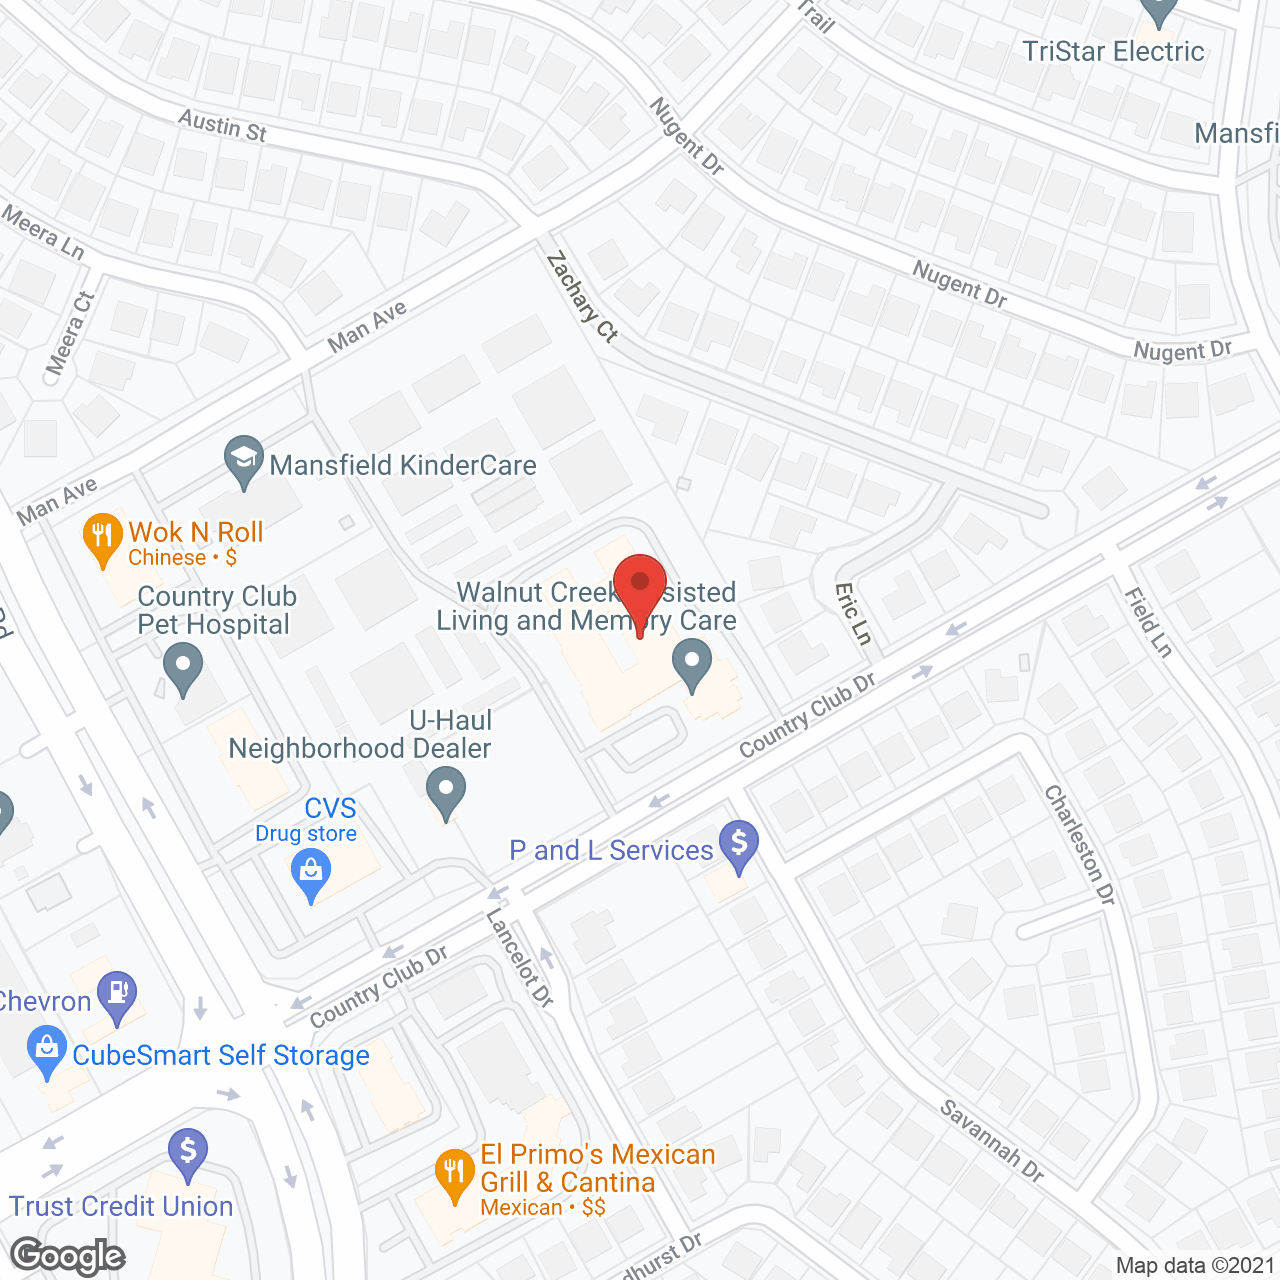 Walnut Creek Assisted Living and Memory Care in google map